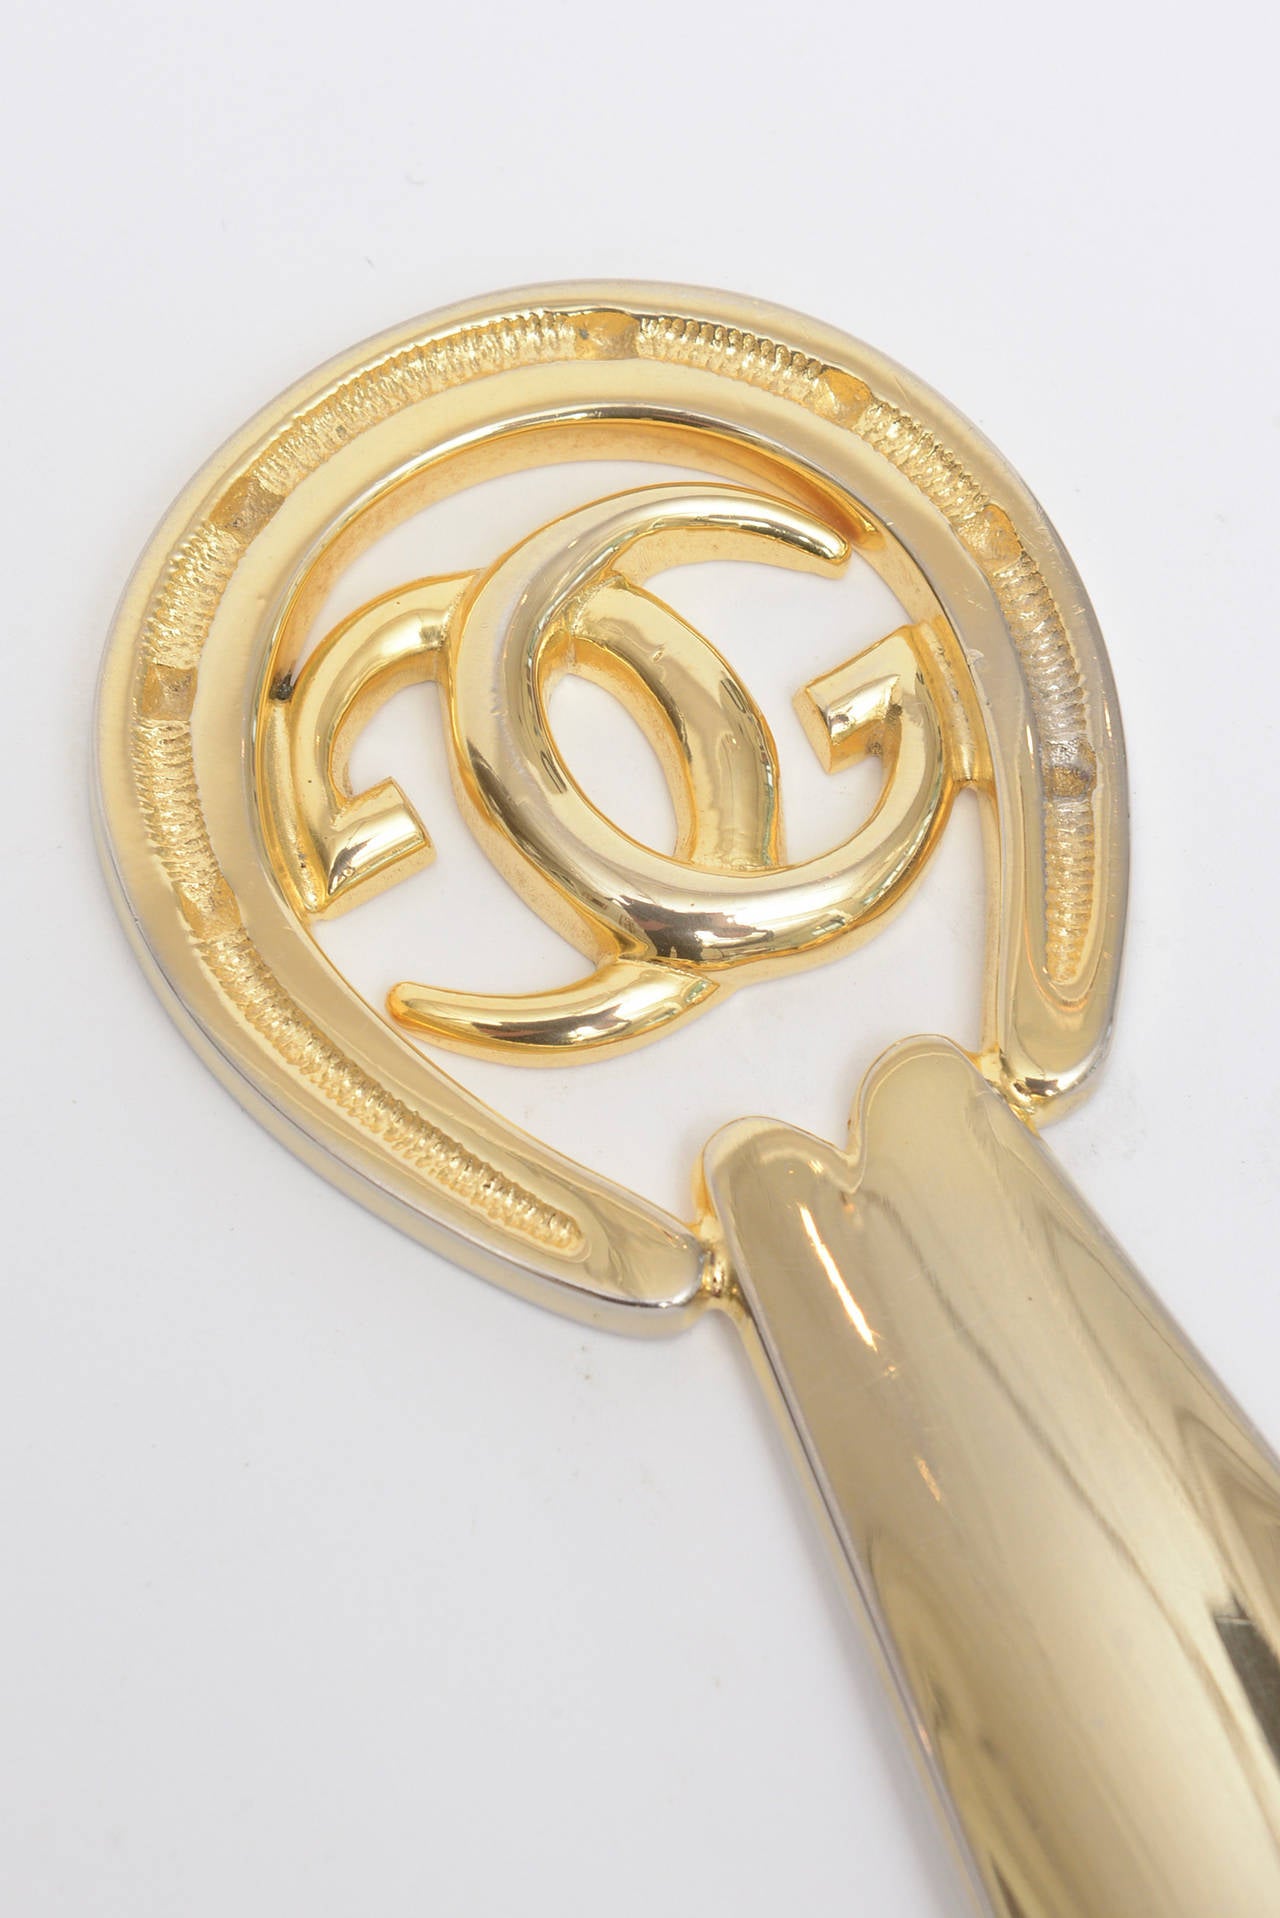 Classic and vintage is this Gucci horseshoe GG gold plated over nickel shoe Horn or desk accessory/ paperweight. It has great weight to it. It is hallmarked on the front... made in Italy.            
At the widest part of the Gucci emblem it is